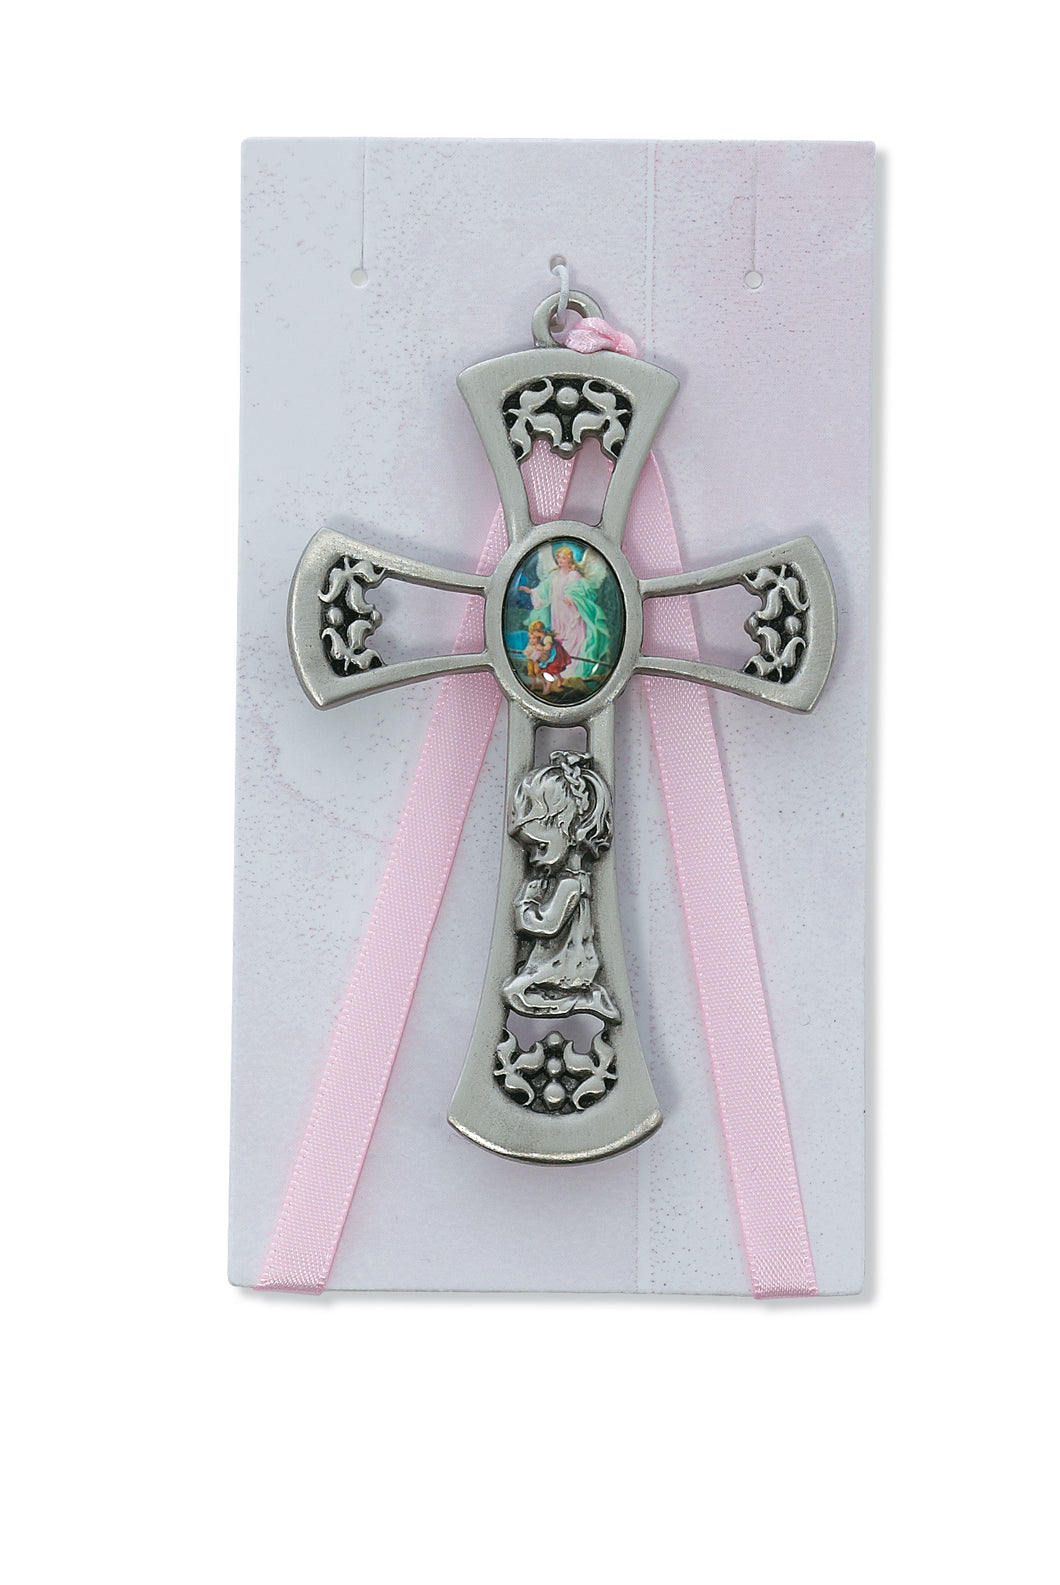 PEWTER/GIRL CRIB CROSS W/G.A - PW10-P - Catholic Book & Gift Store 